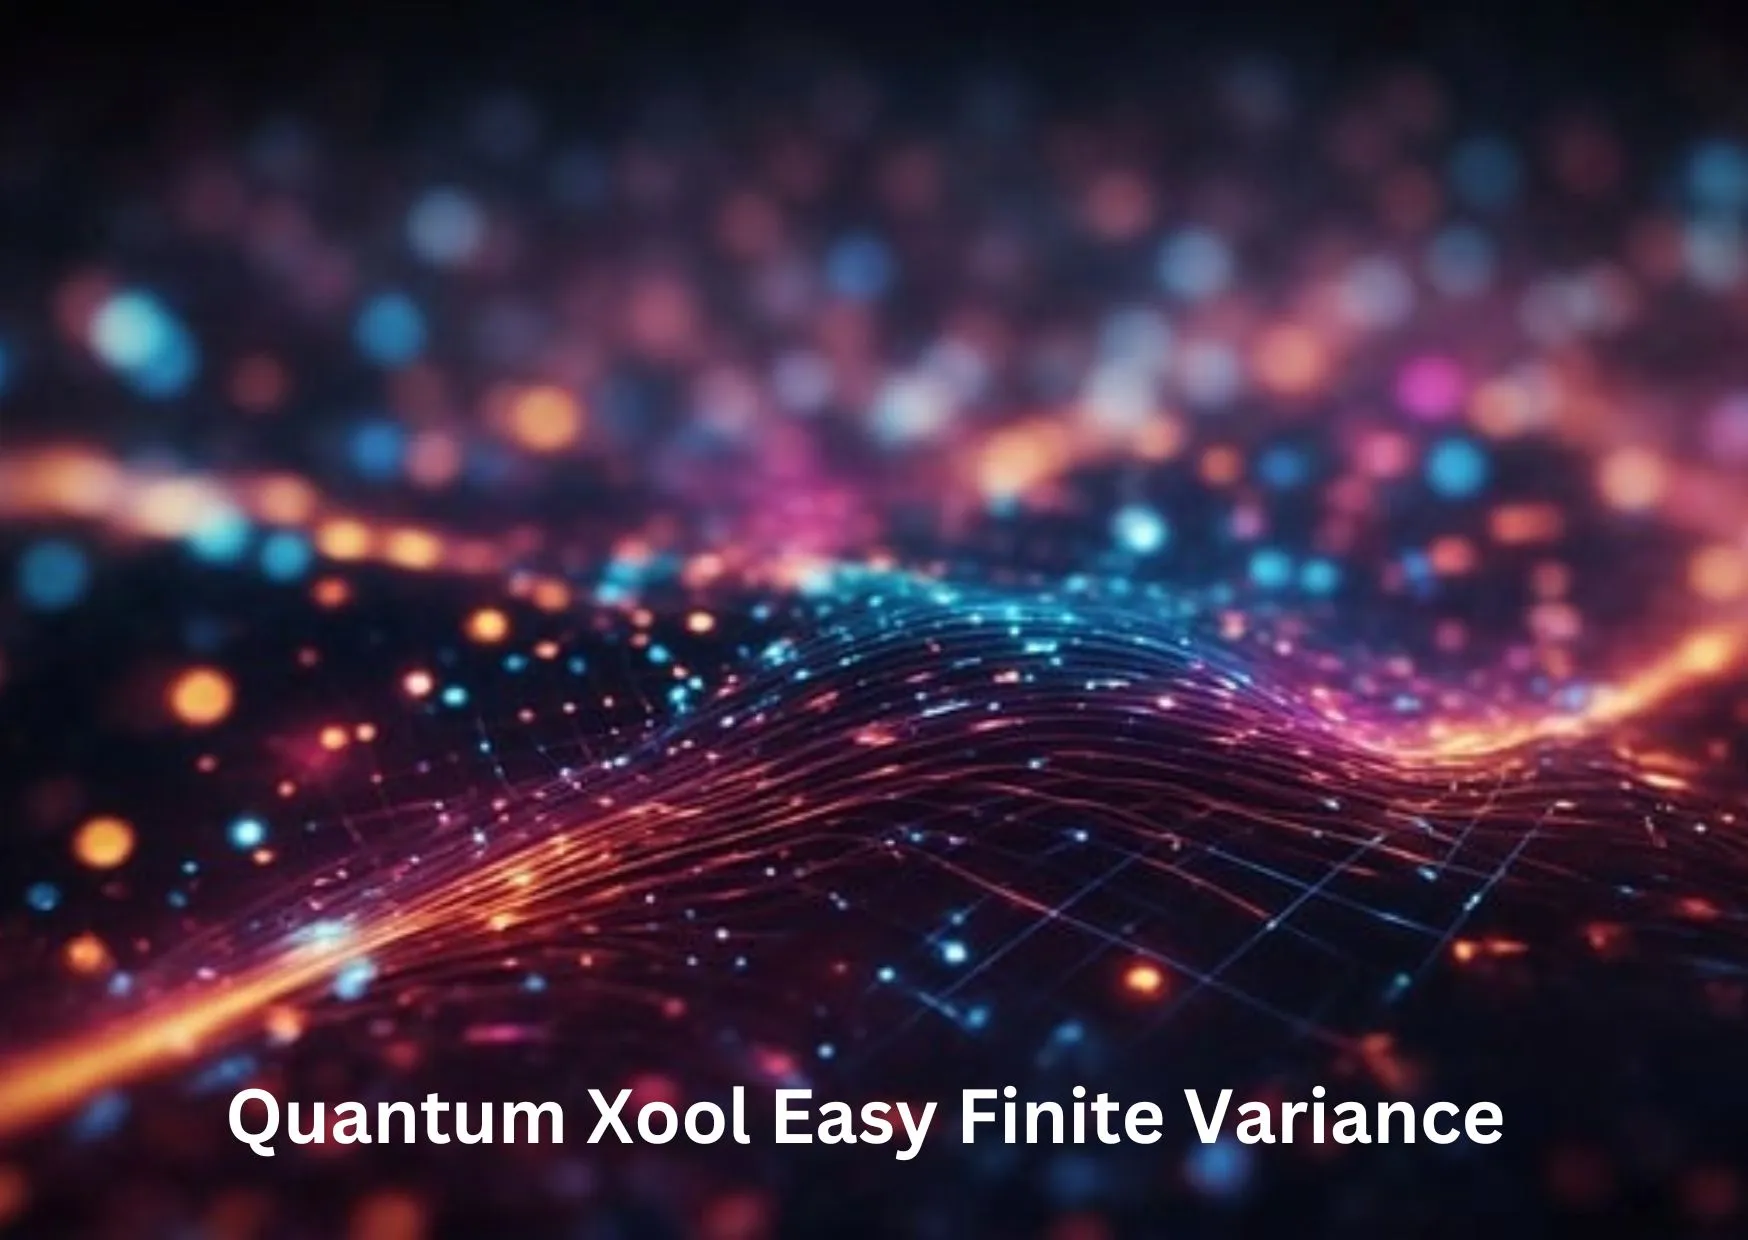 Qxefv – Quantum Xool Easy Finite Variance: The Unseen Forces of Innovation